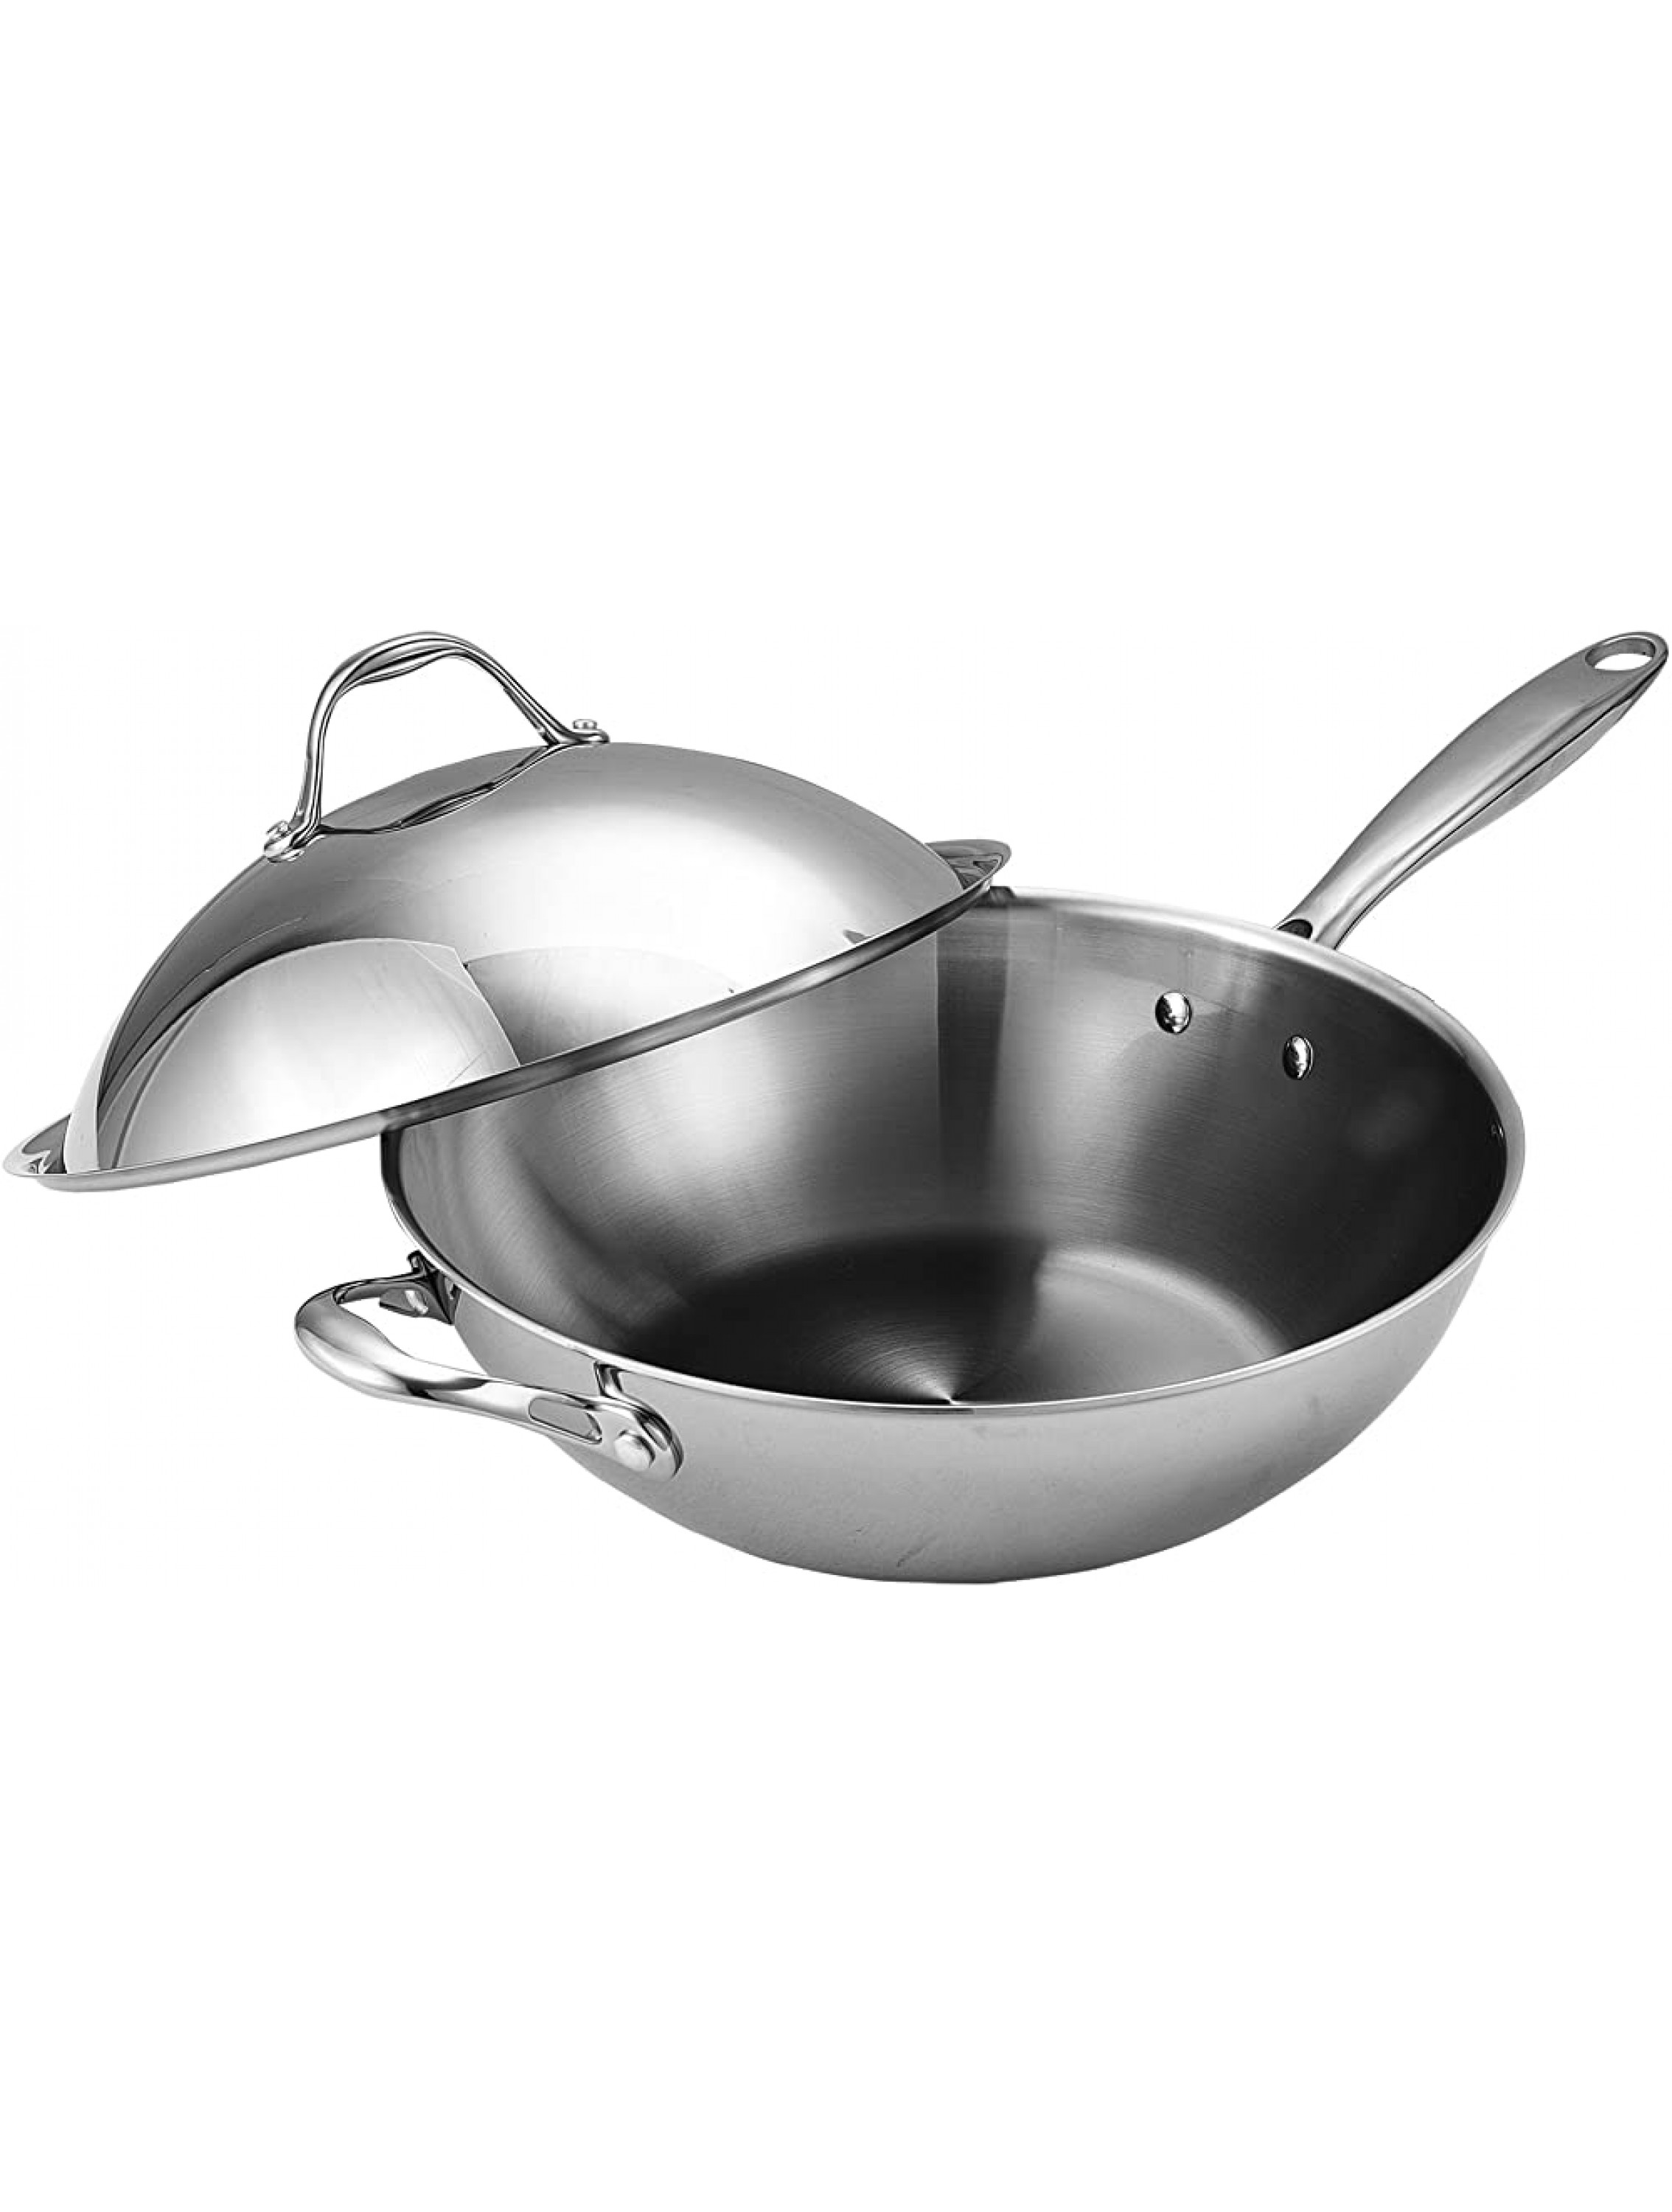 Cooks Standard Stainless Steel Multi-Ply Clad Wok 13 with High Dome lid Silver - BMQ86XYVX